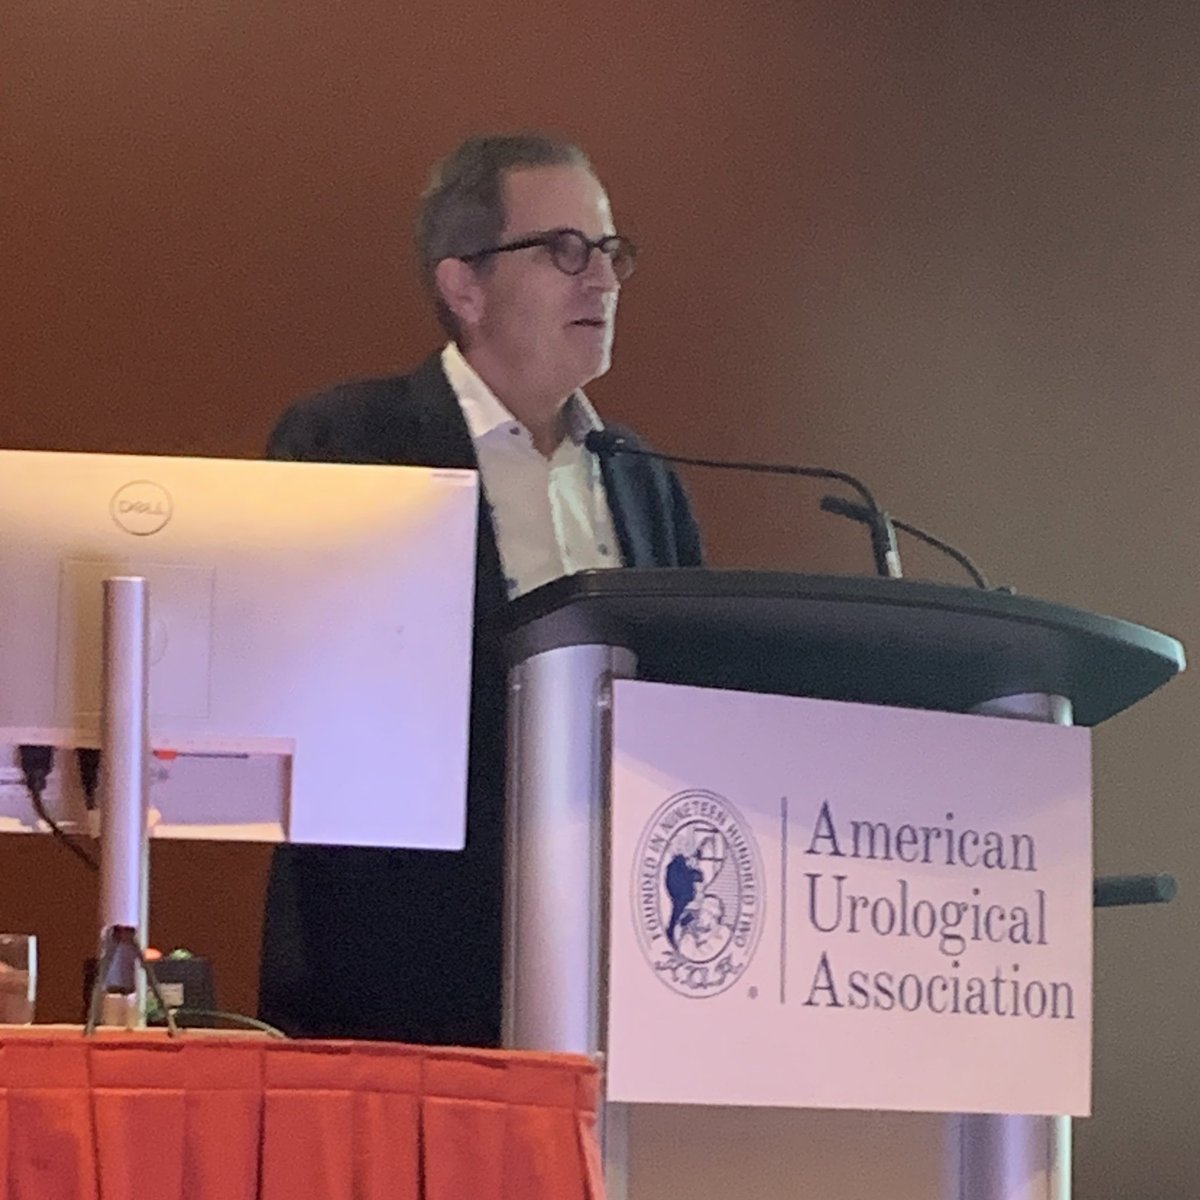 Great to share the stage with the amazing Dr Neil Shore, longtime friend and @DukeU alumni. We both had honor and pleasure to address the AEU @InfoAeu during #AUA24 on advanced pros Ca. My task was PARP inhibitors-three new FDA approvals just since last AUA!